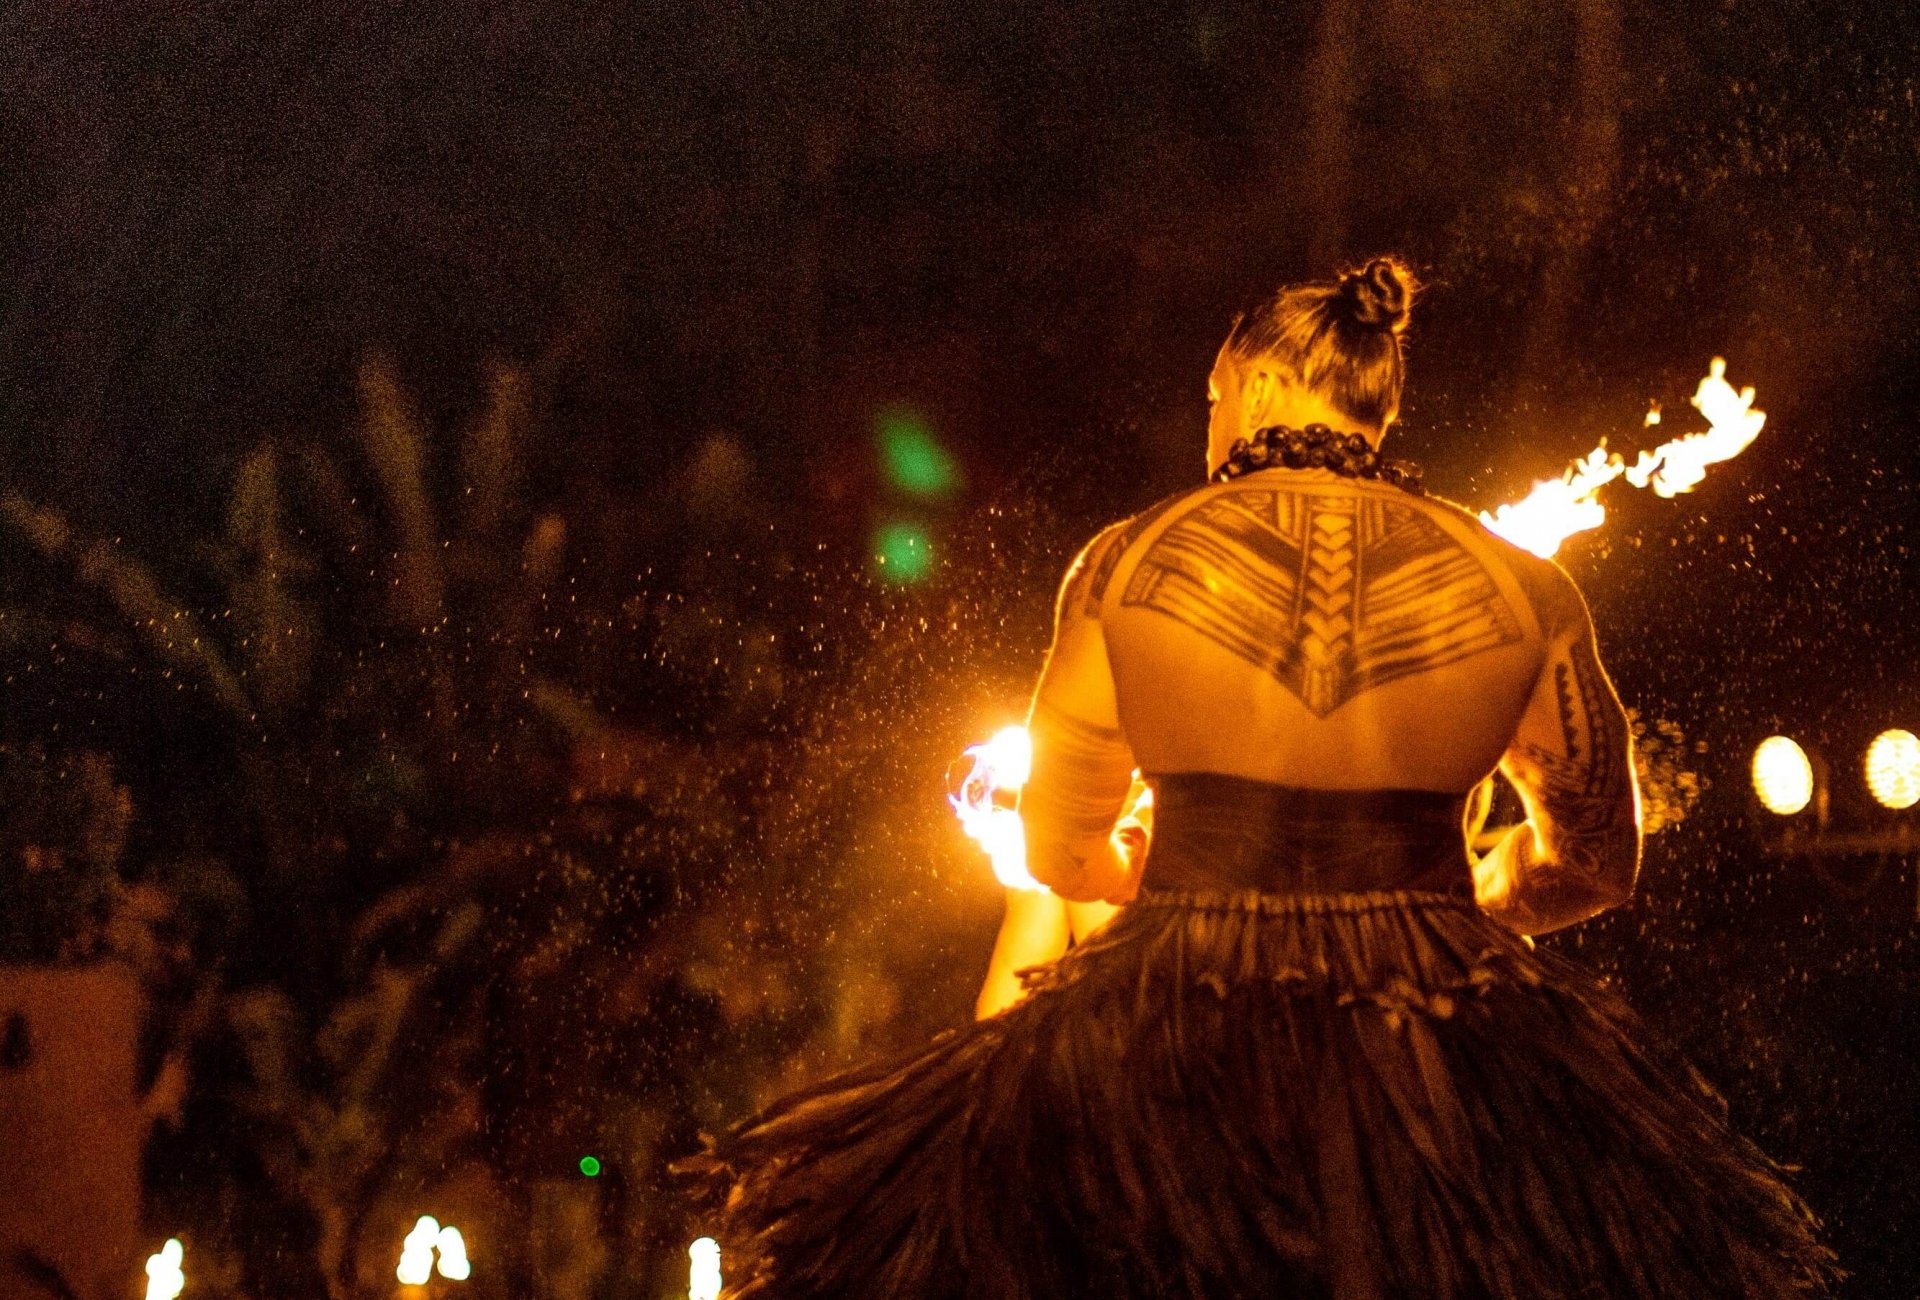 fire performer stands with his back to the camera with large tattoo on his upper back